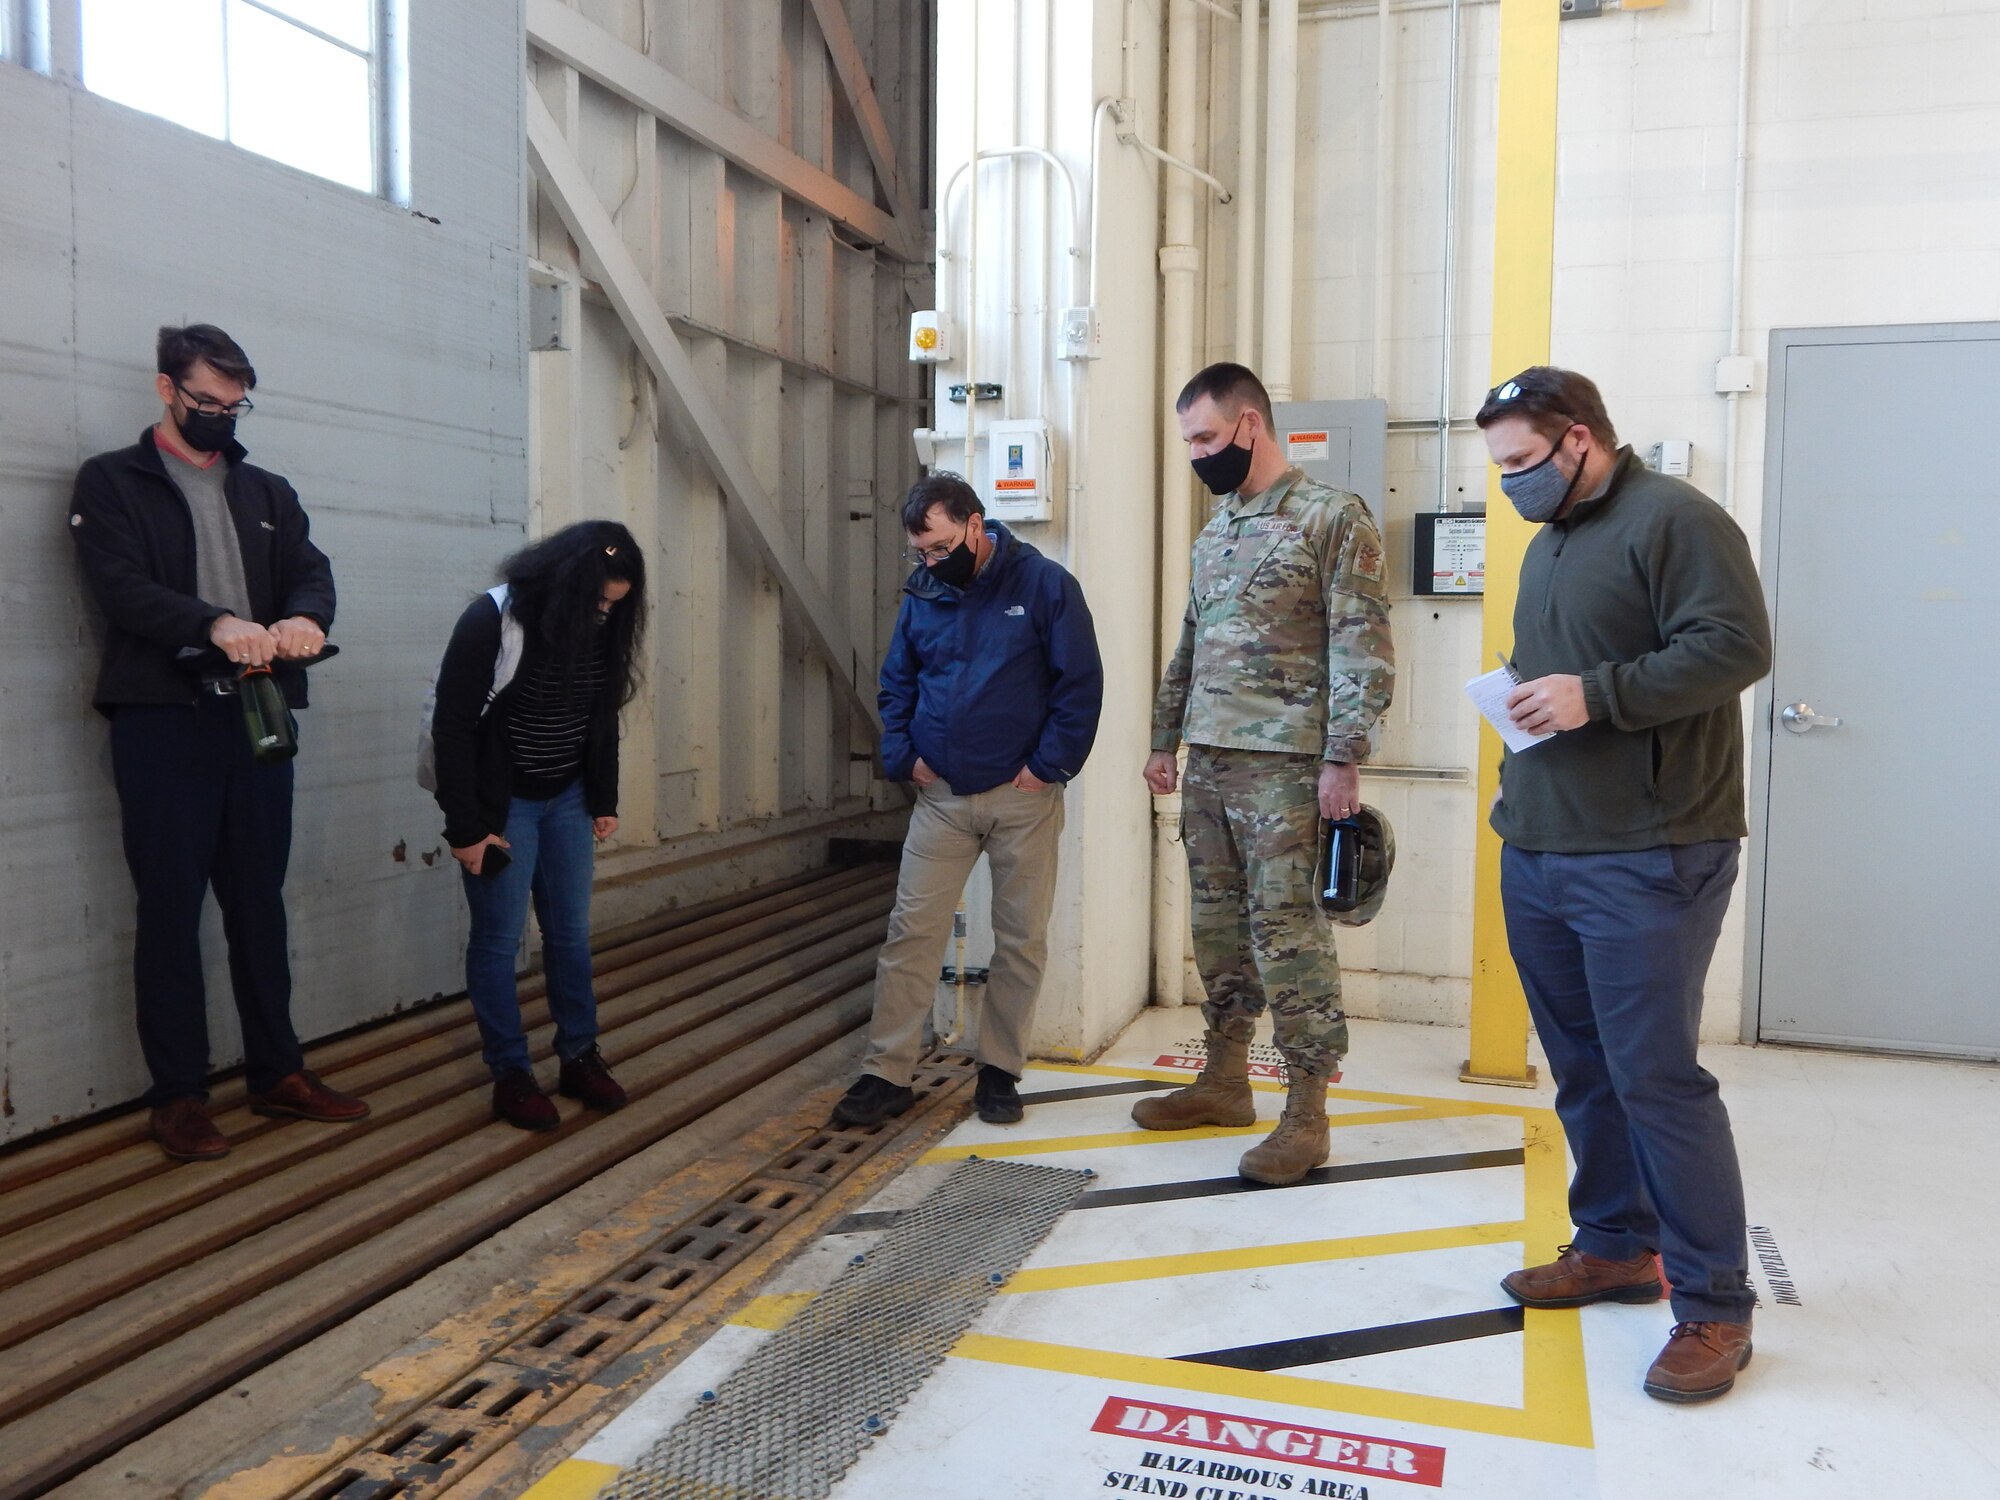 Washington University graduate students (left to right) Kyle Collier, Astha Bhatnagar, and Cam Loyet talk with 375th Civil Engineer Squadron’s Kenneth Cavanaugh (middle) and squadron commander Lt. Col. Paul Fredin about water drainage inside Hangar 3.  On Aug. 12, 2020, over five inches of rain fell within two hours on Scott Air Force Base causing damage to several buildings including the hangar. The students discussed several potential solutions to prevent future flooding inside the hangar. (Photo by Christine Spargur)